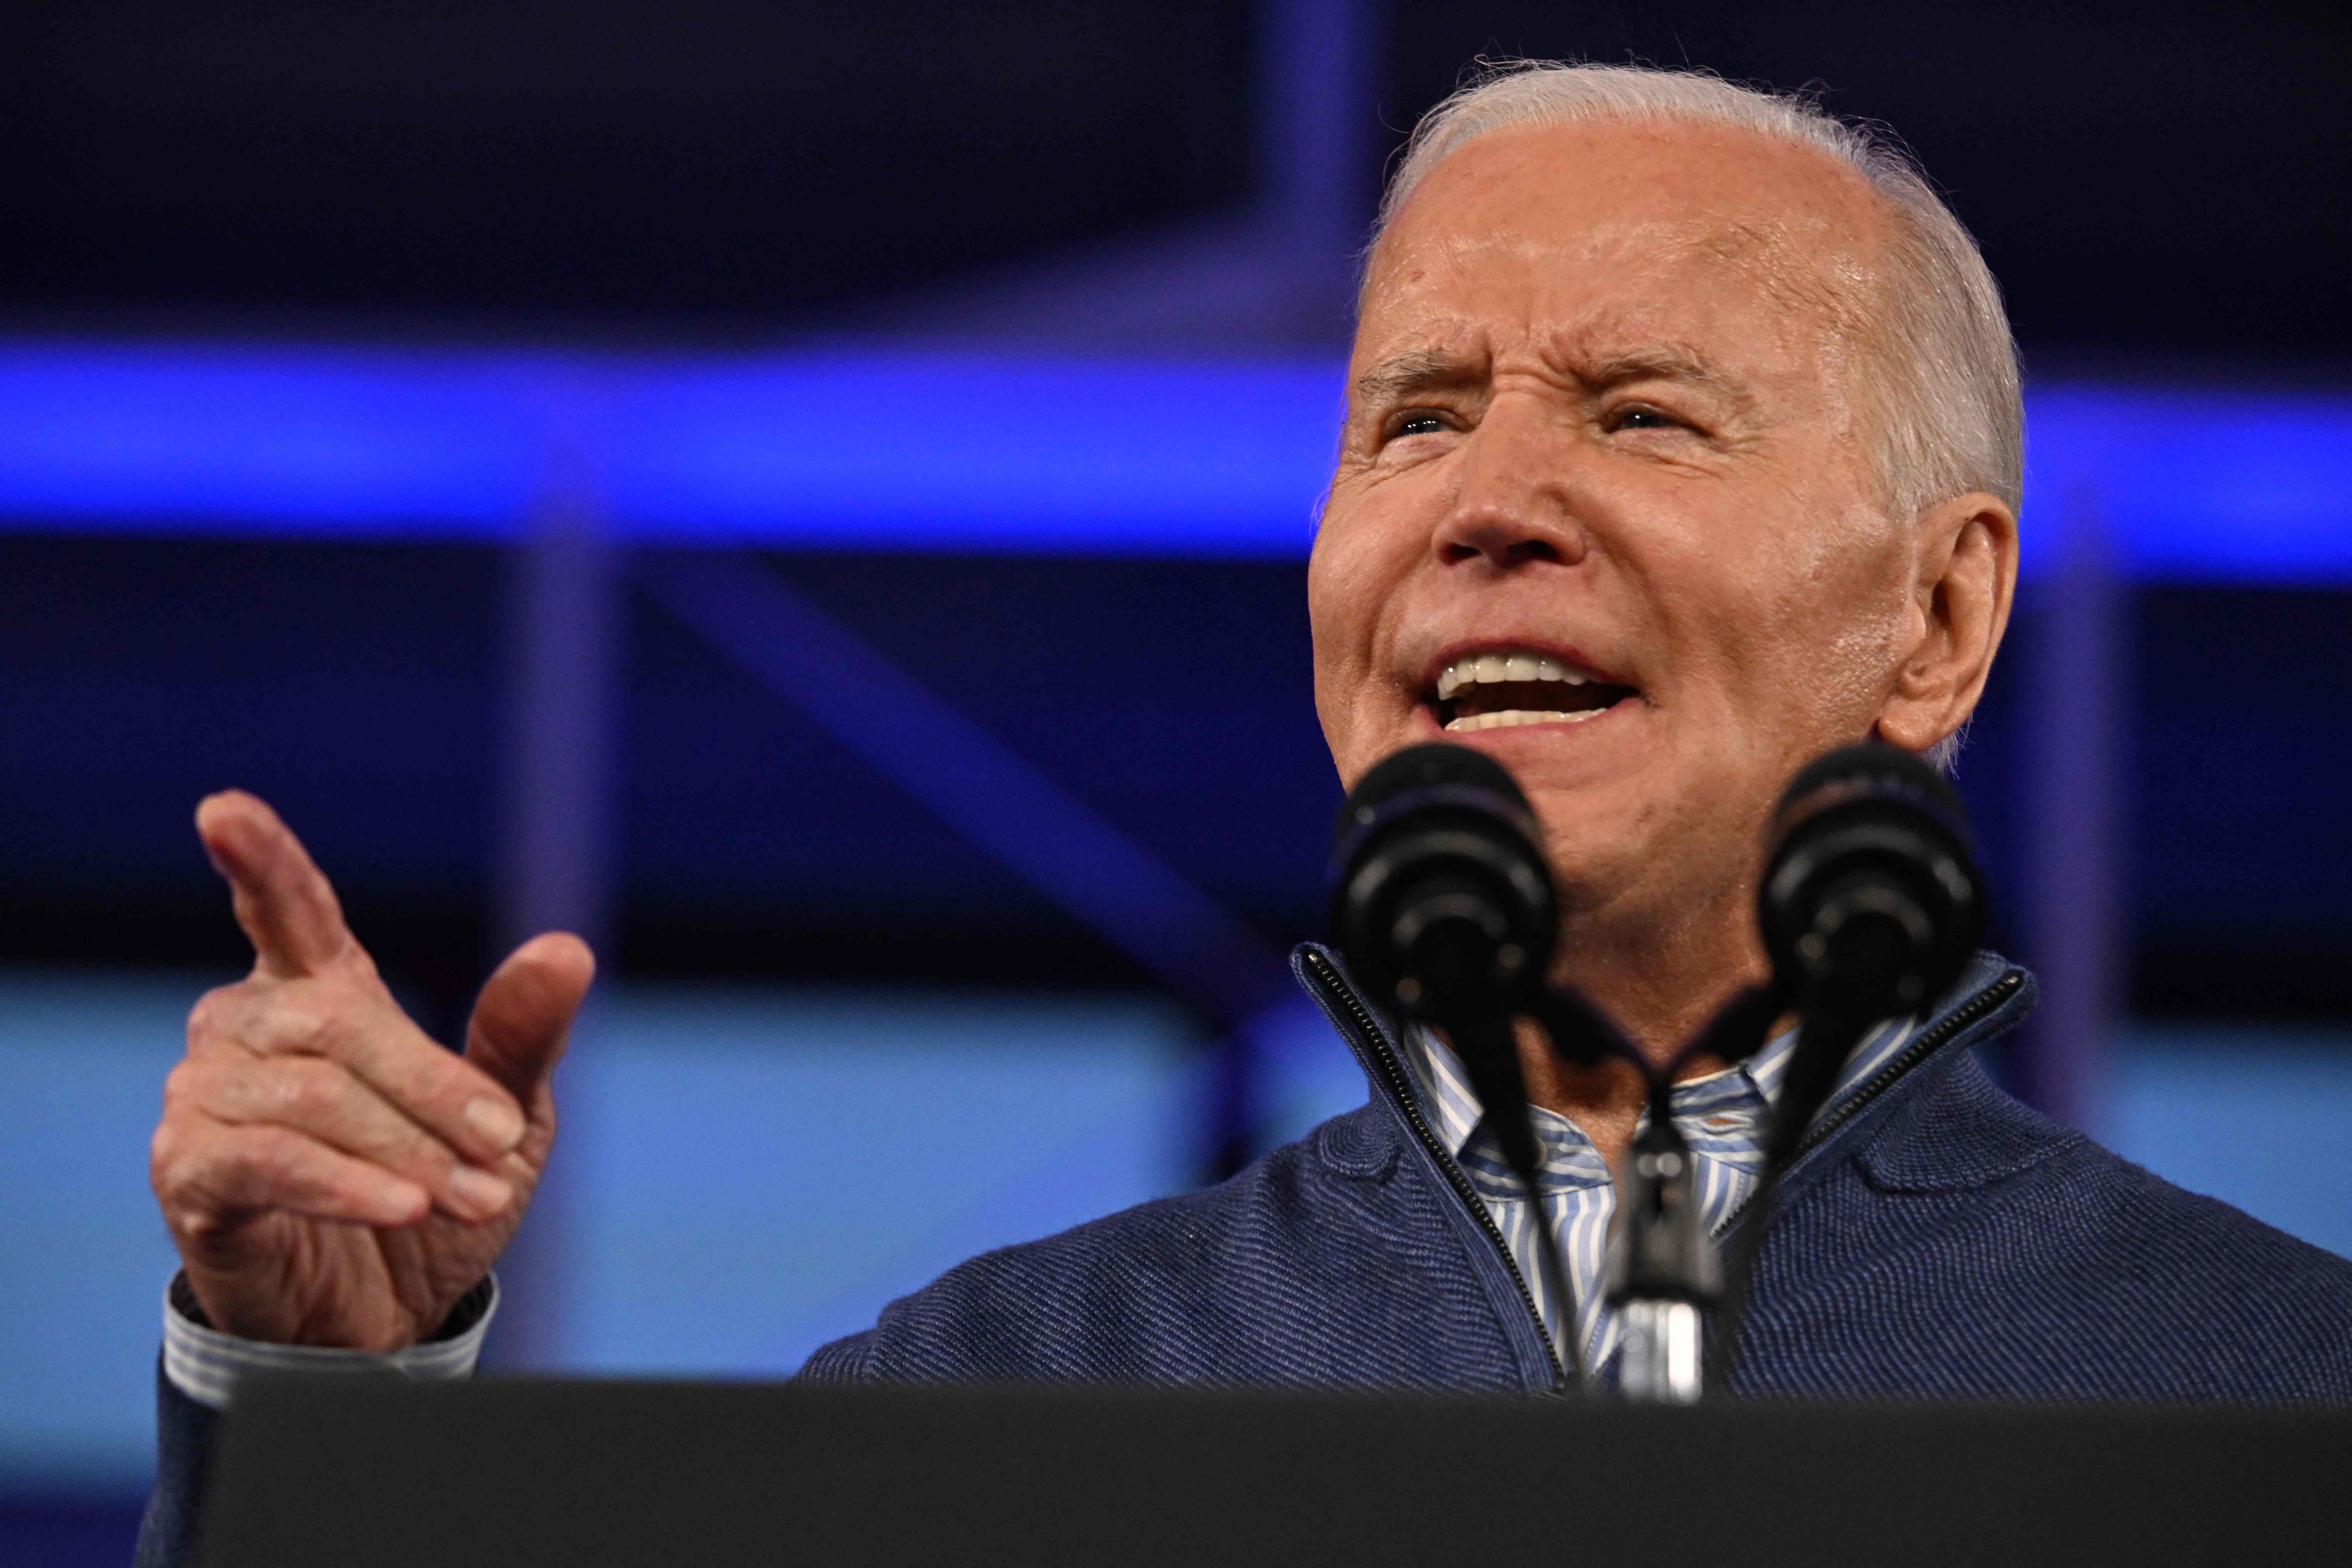 US President Joe Biden, who seeks re-election in November, speaks at a campaign event in Philadelphia, Pennsylvania, on Friday. Photo: AFP